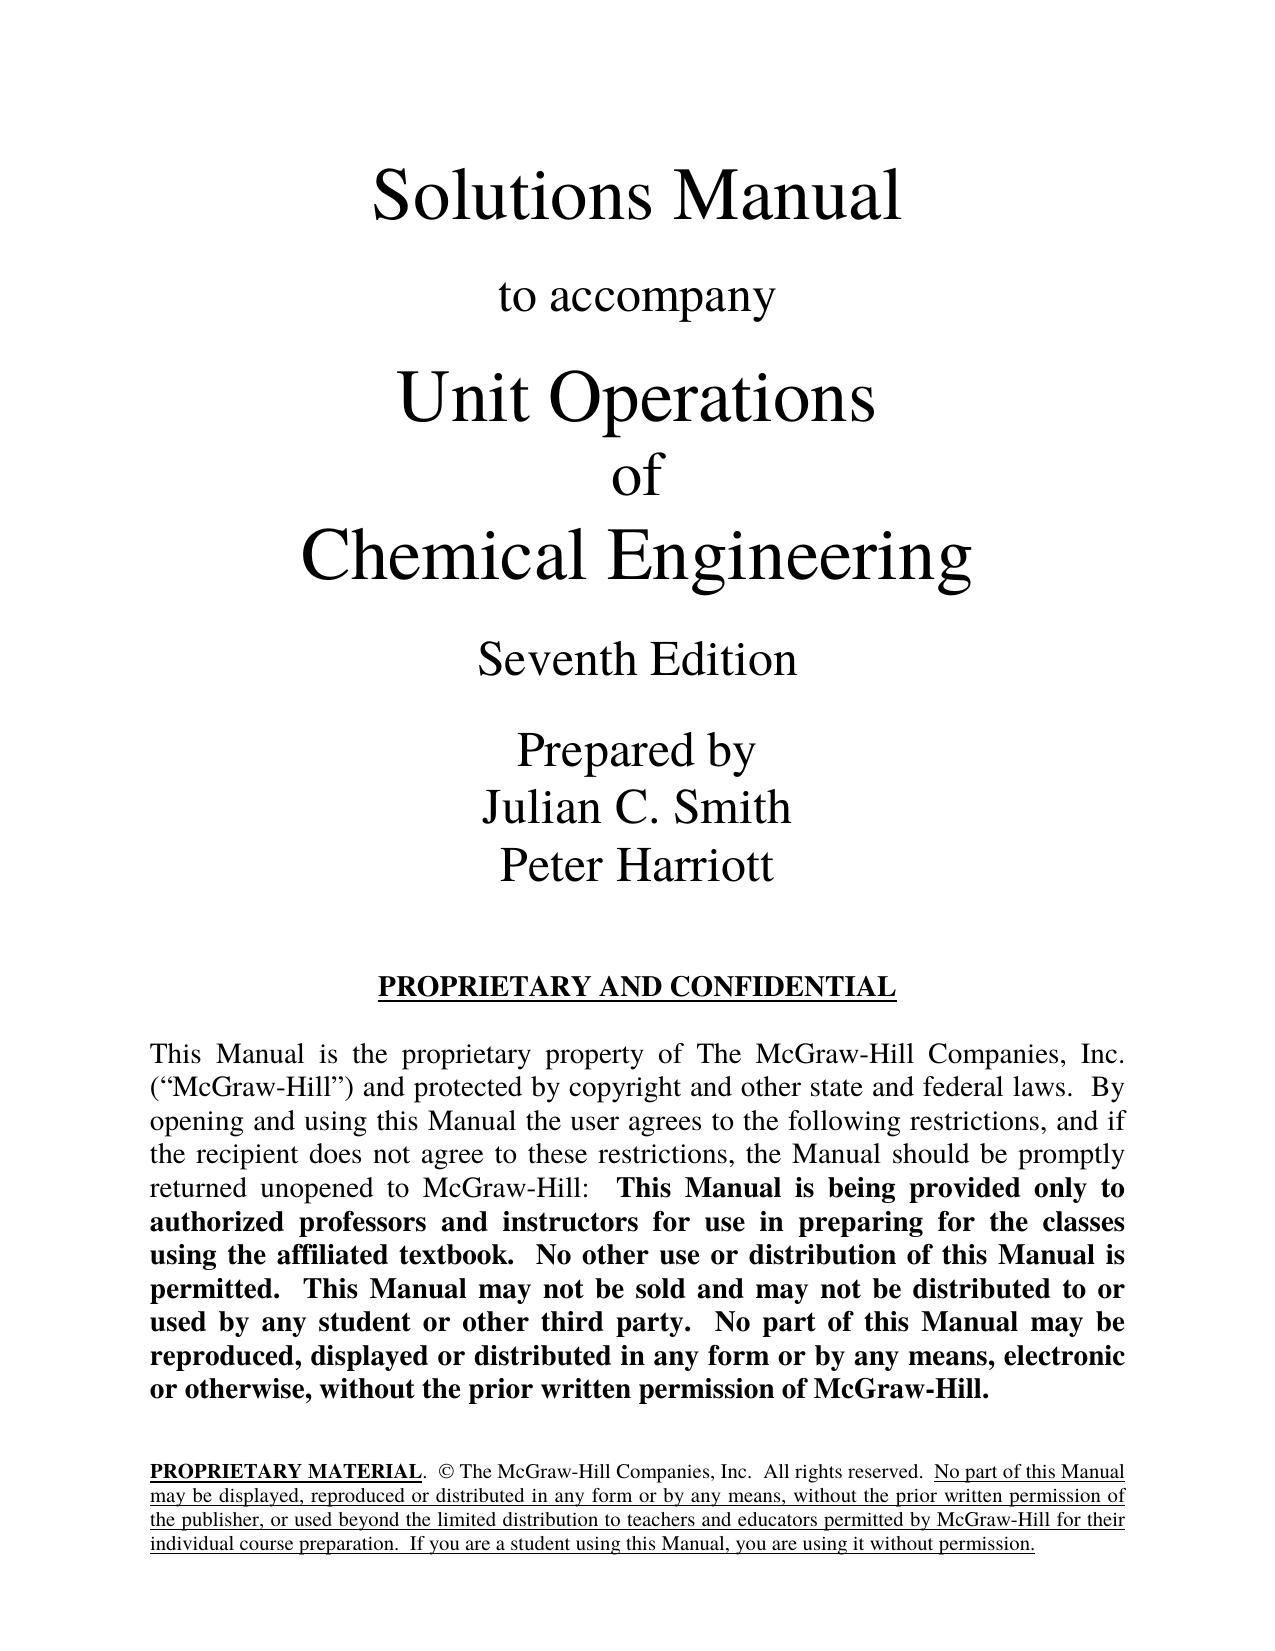 Unit Operations of Chemical Engineering, 7th Edition, Solutions Manual by Unknown